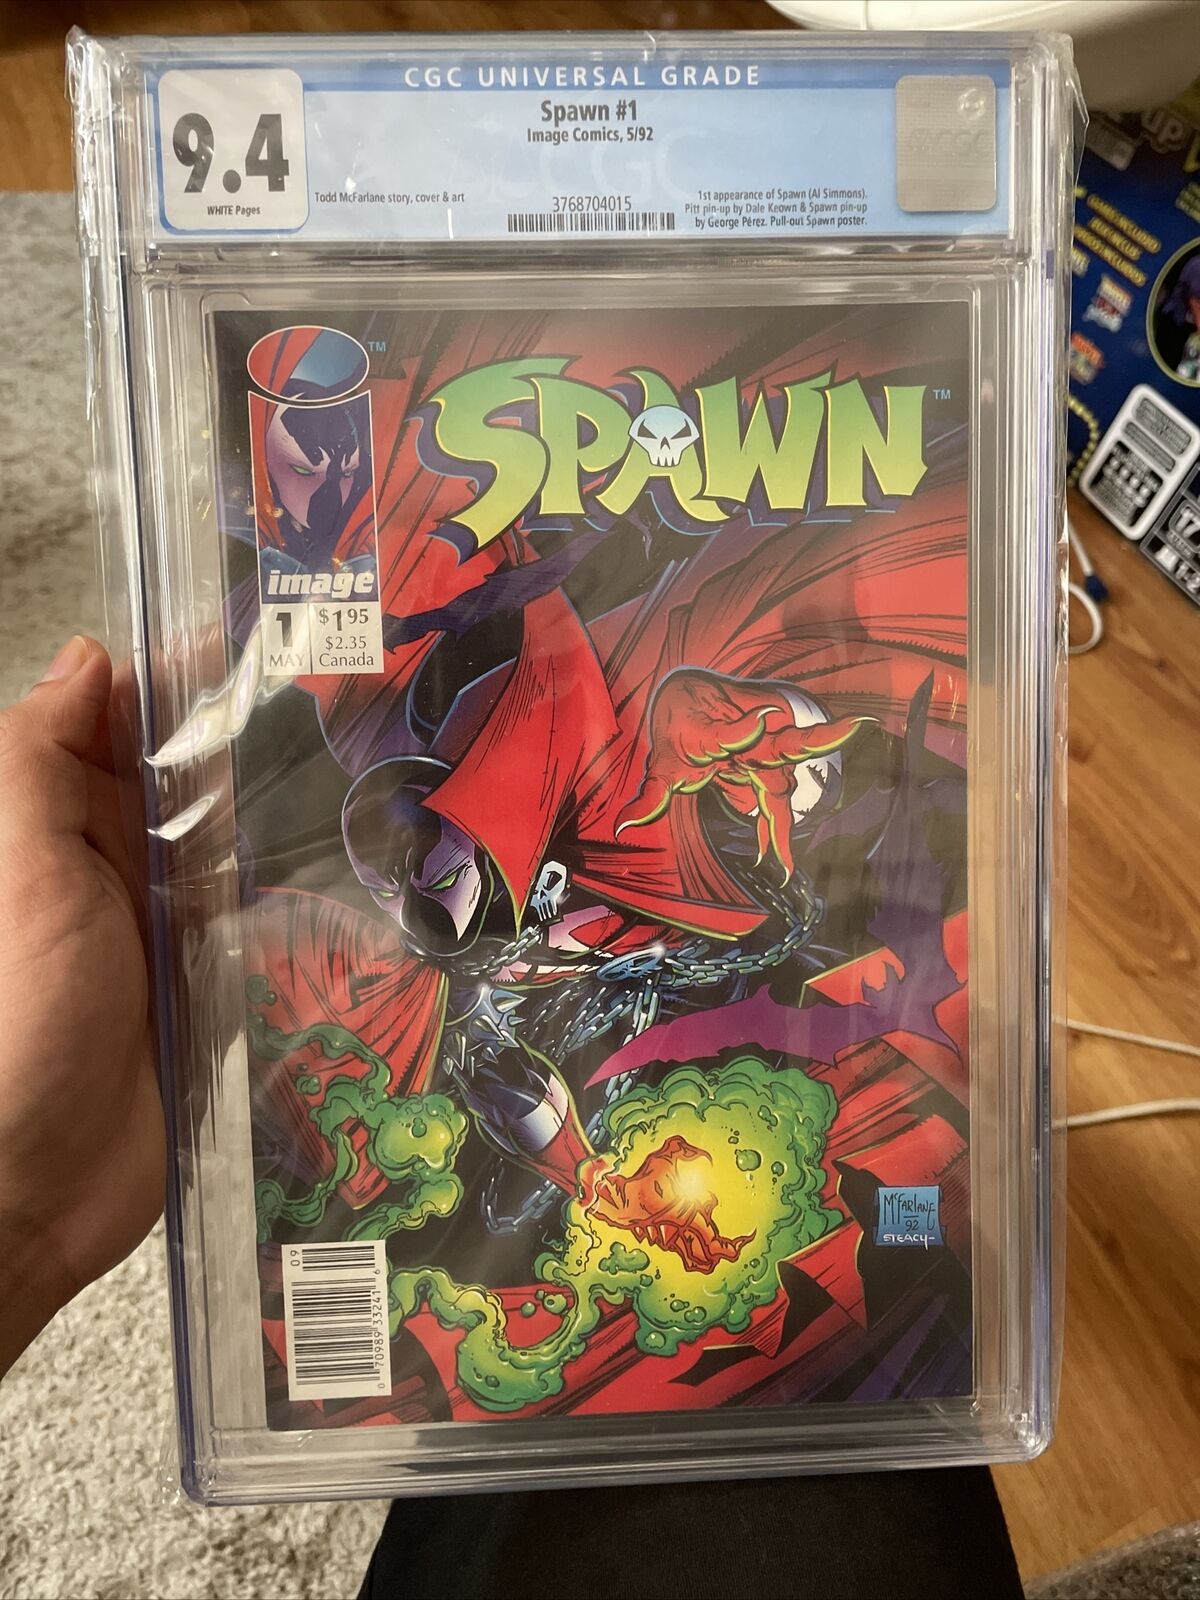 Spawn #1 (Image Comics, May 1992) FIRST PRINT NEWSSTAND EDITION